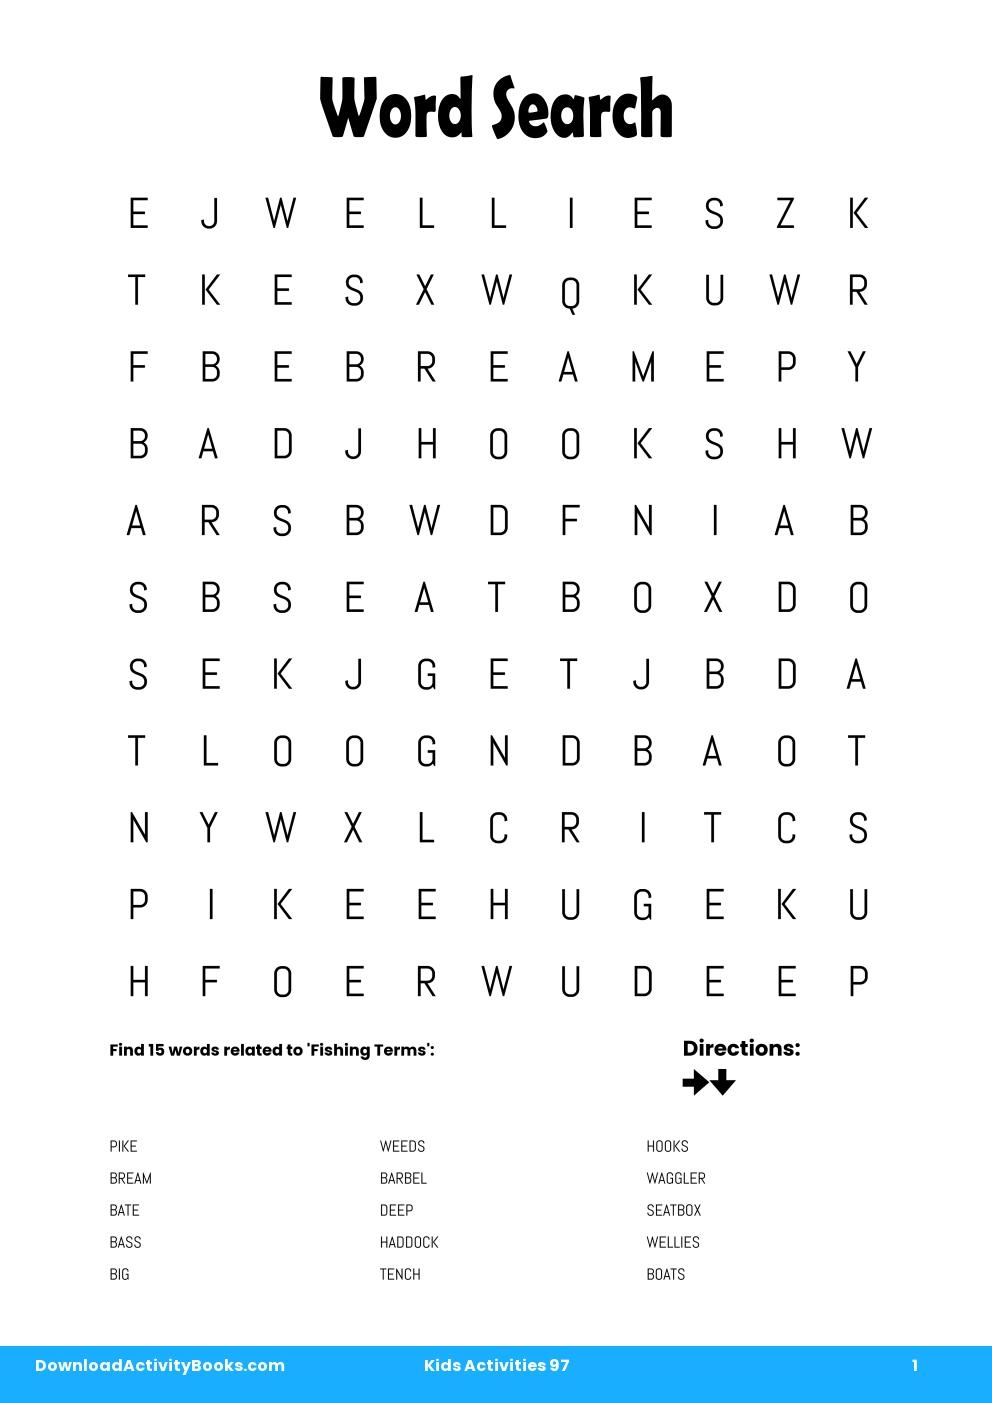 Word Search in Kids Activities 97